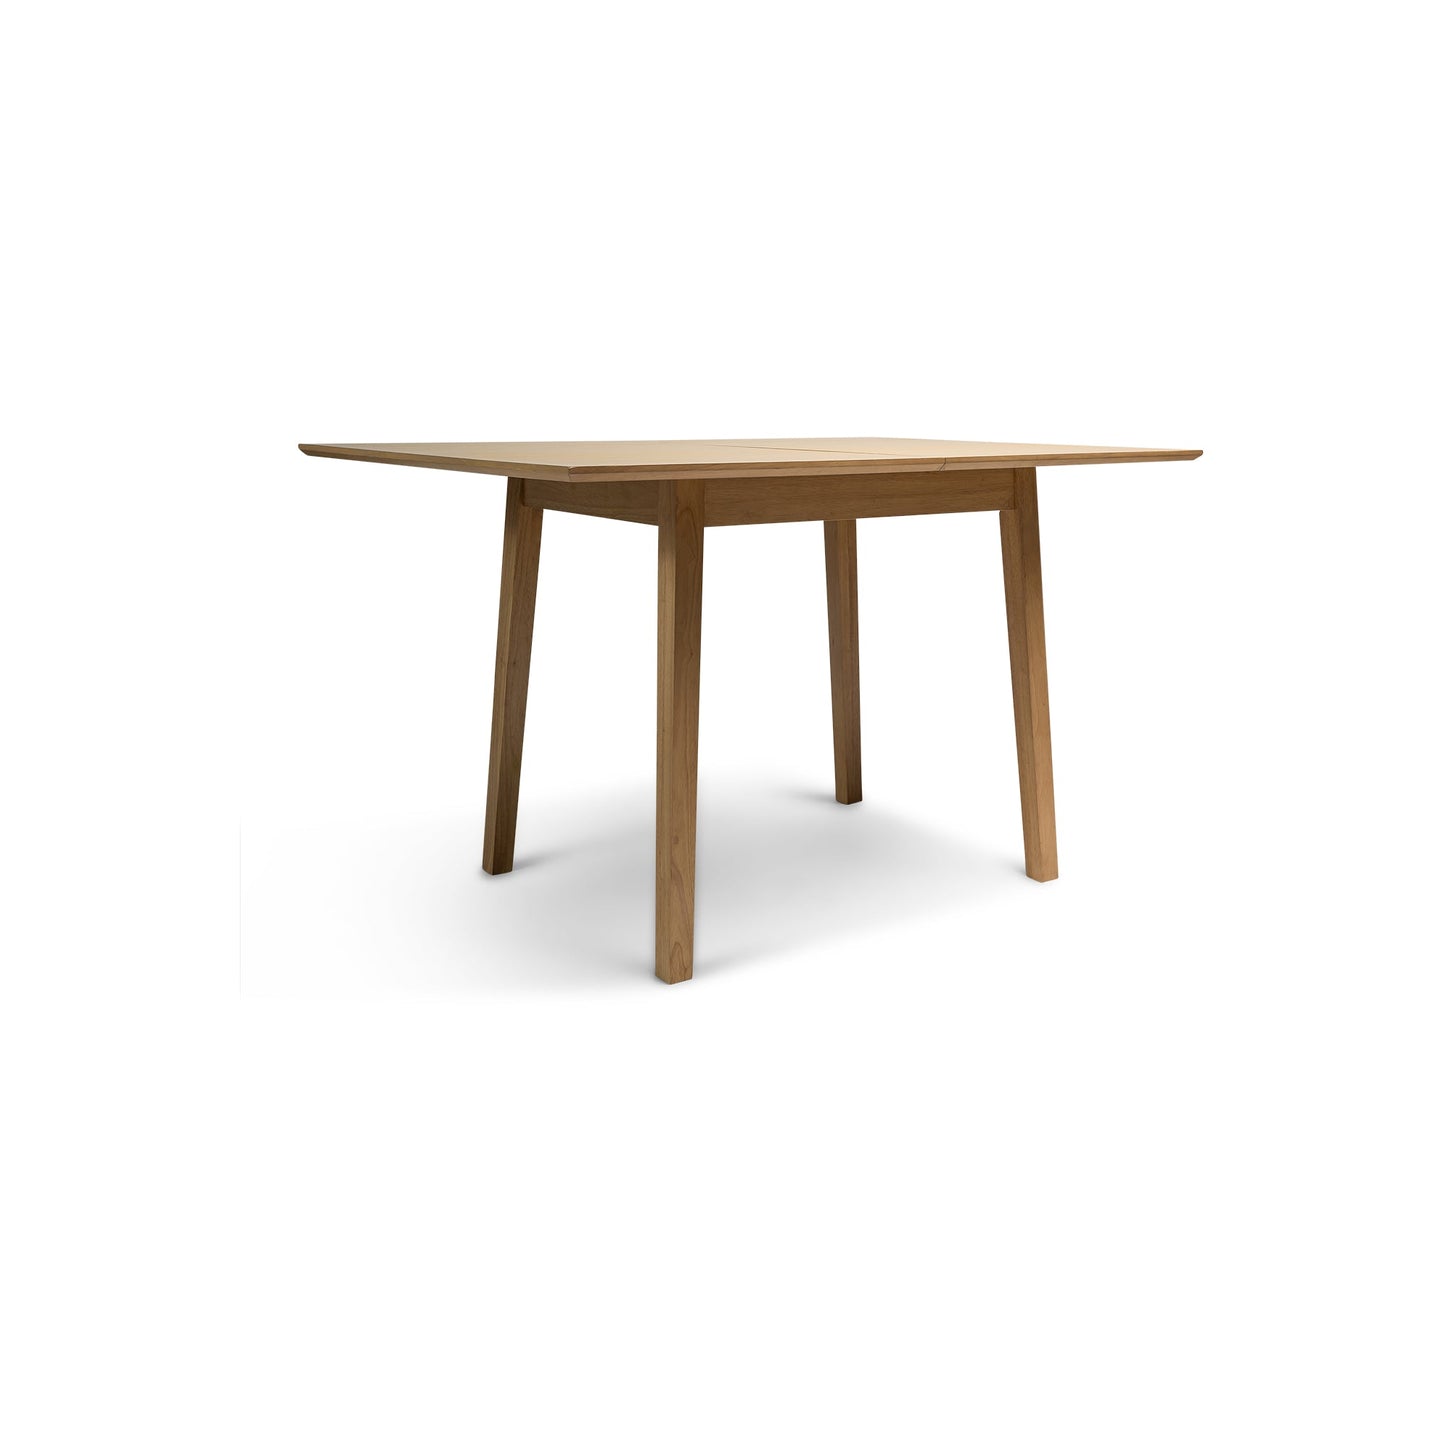 Charlie Classic Oak Extending Dining Table - Laura James